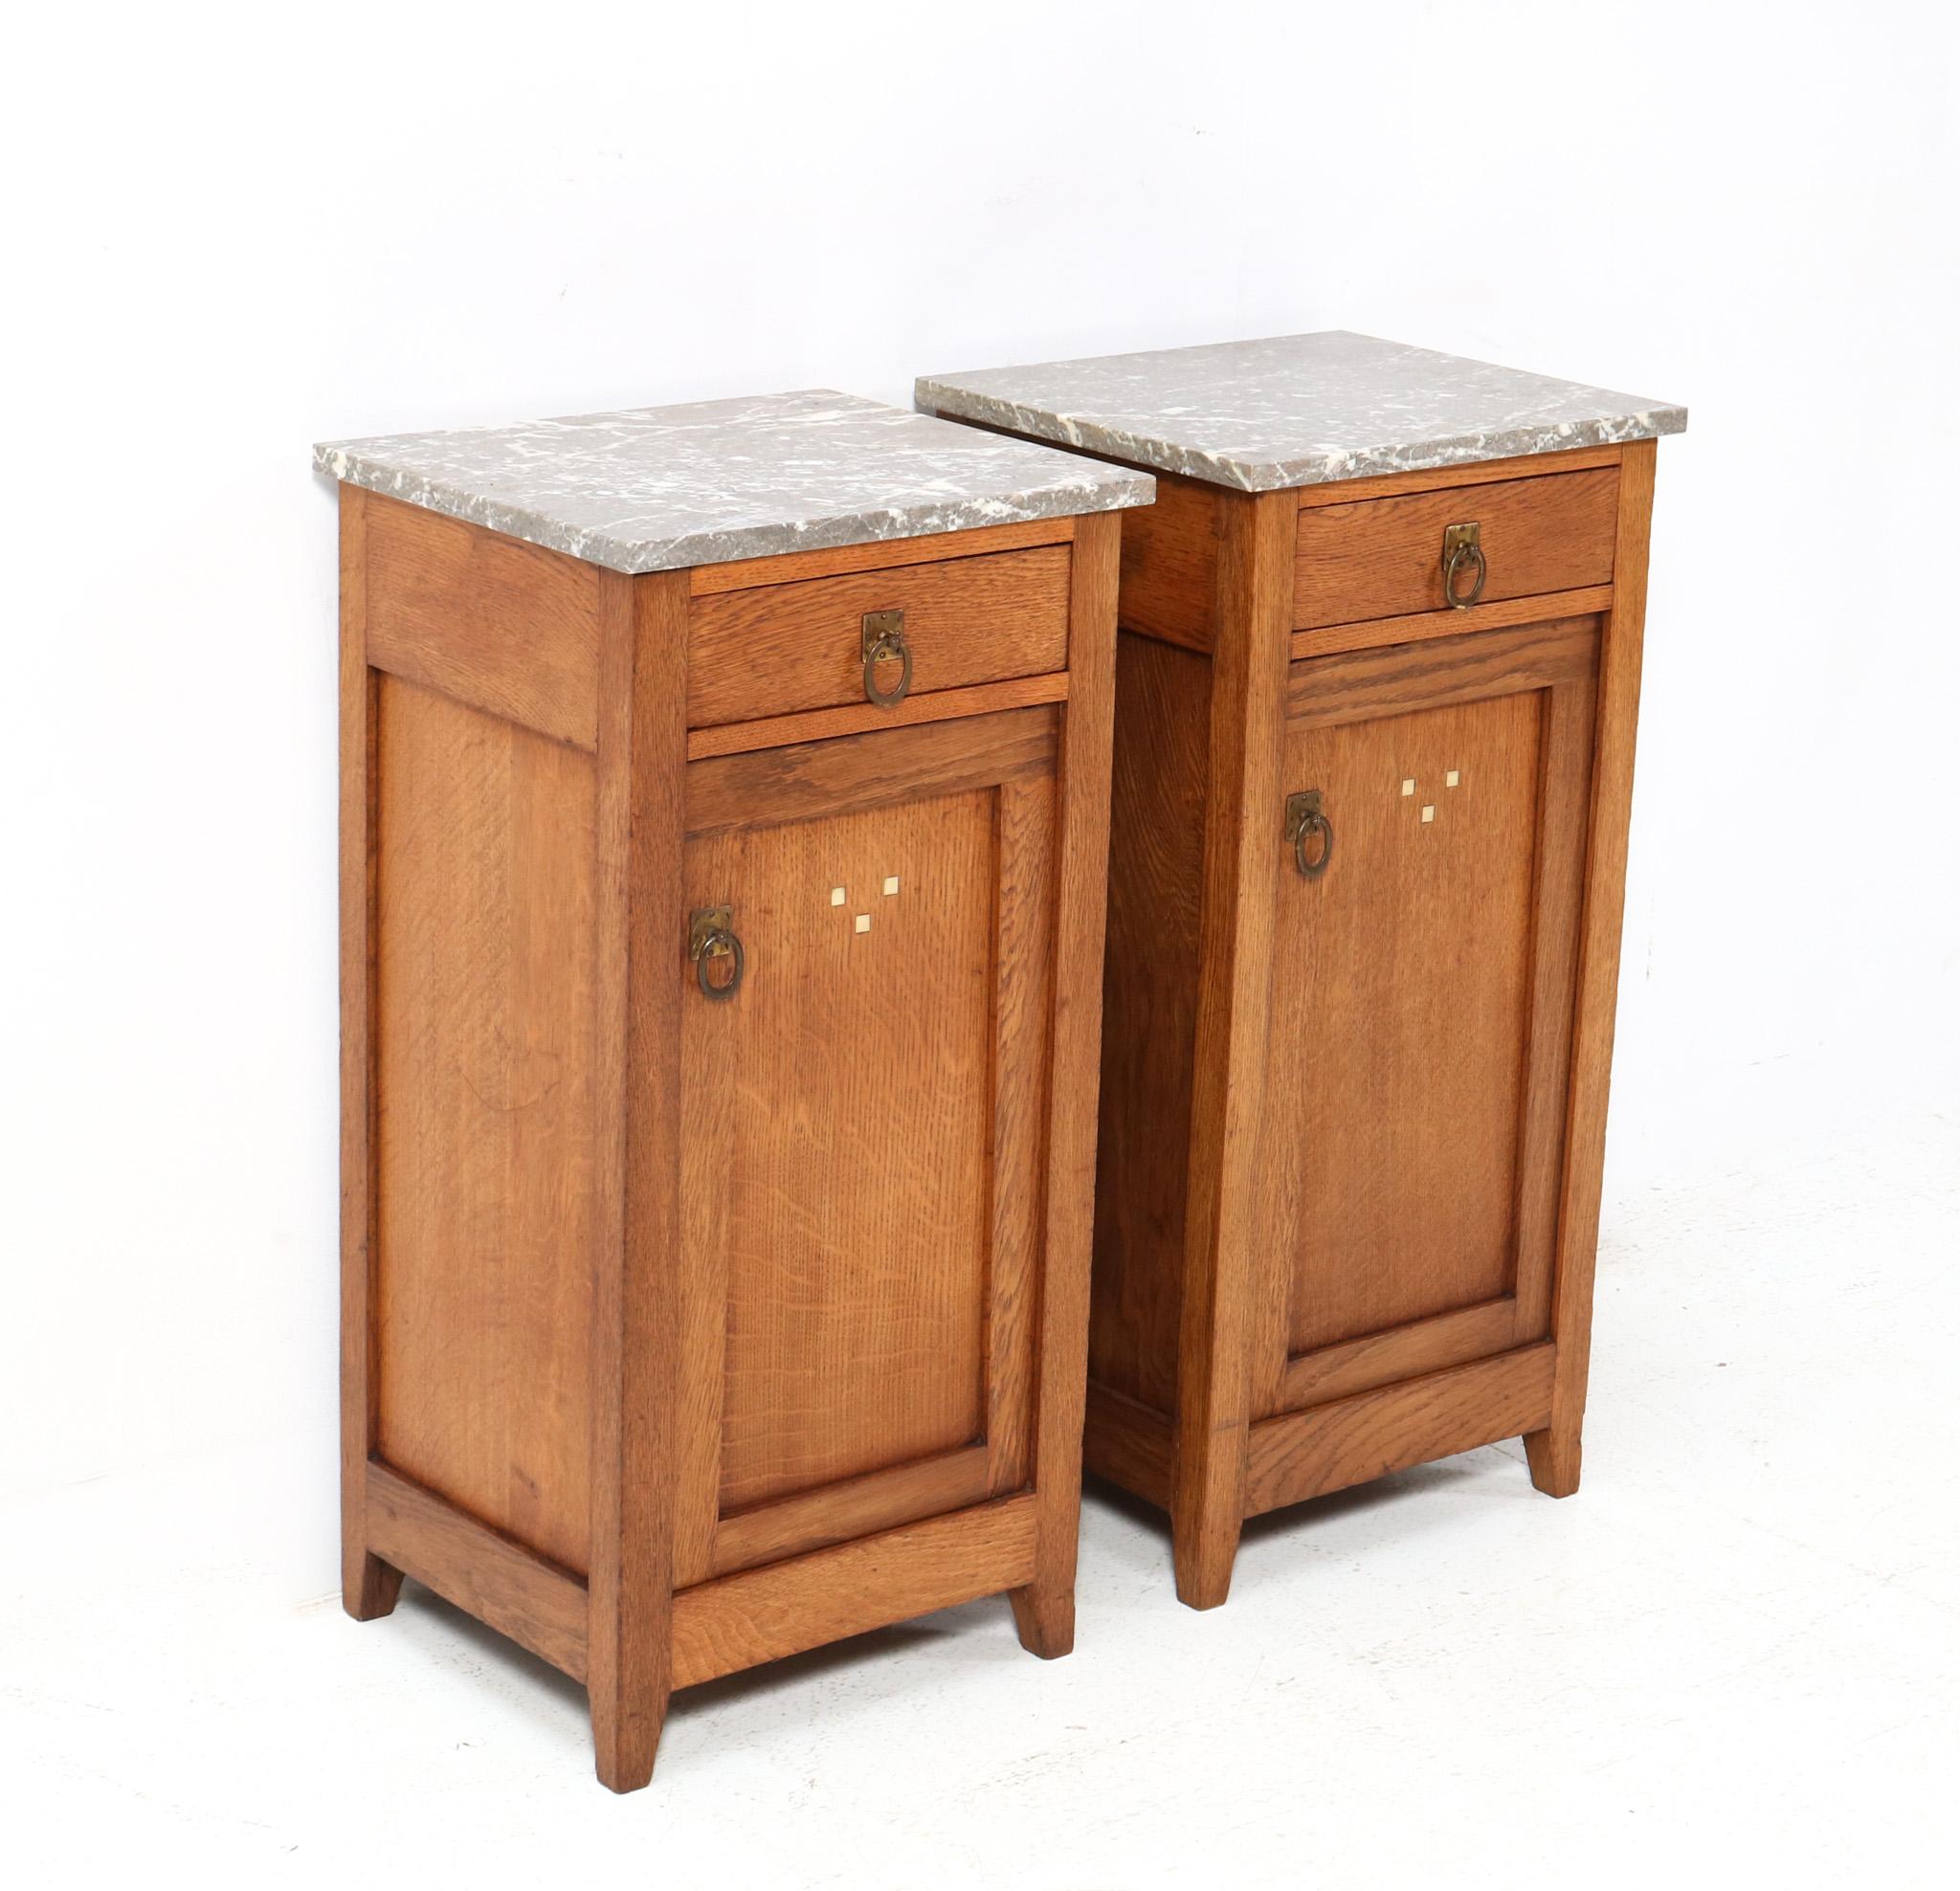 Stunning and rare pair of Art Nouveau Arts & Crafts bedside tables or nightstands.
Striking Dutch design from the 1900s.
Solid oak with original brass handles on doors and drawers.
Two original multi-colored marble tops.
This wonderful pair of Art